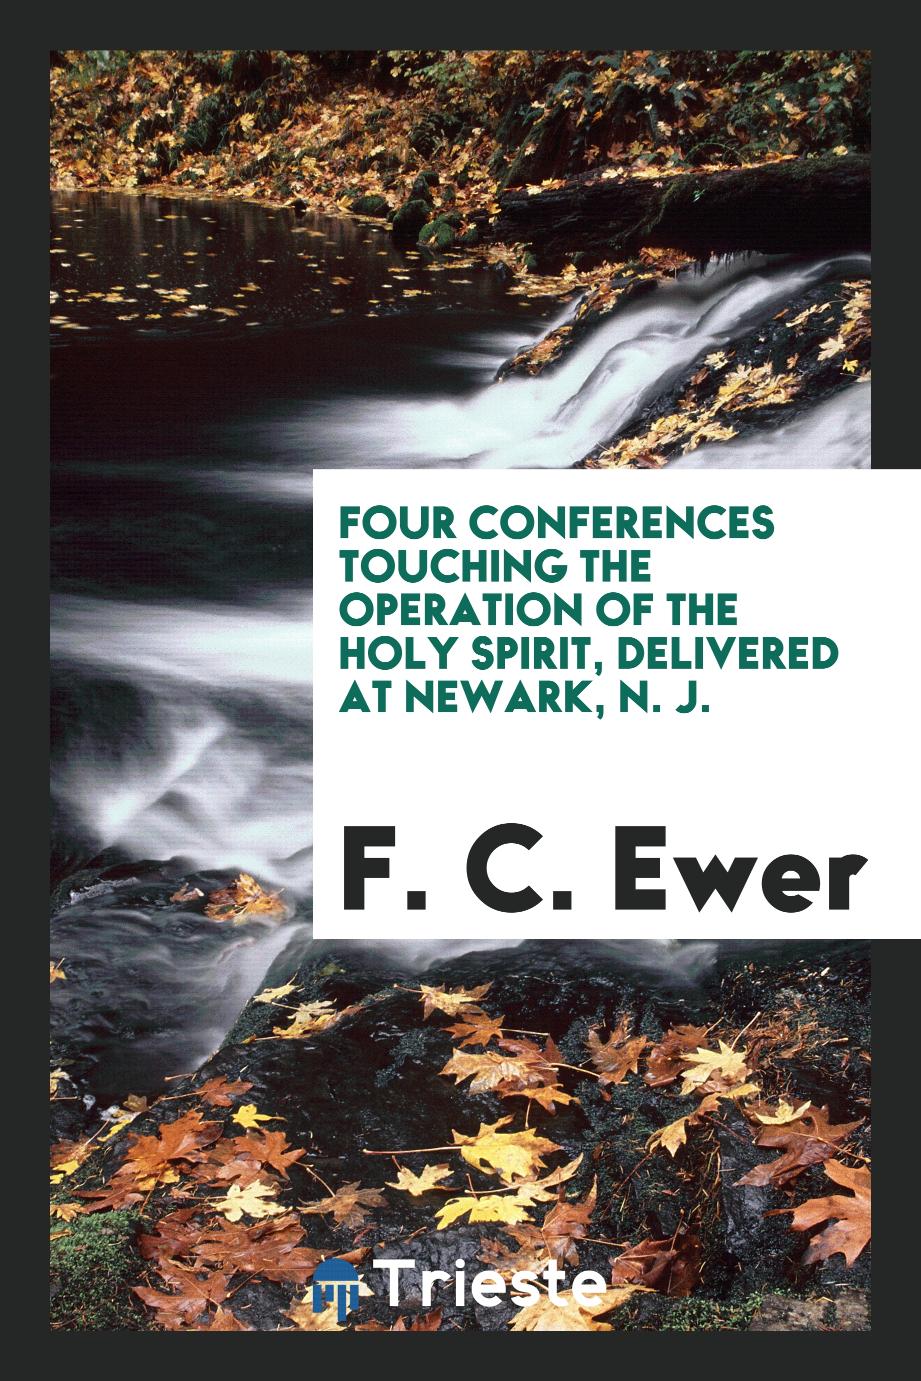 Four Conferences Touching the Operation of the Holy Spirit, Delivered at Newark, N. J.